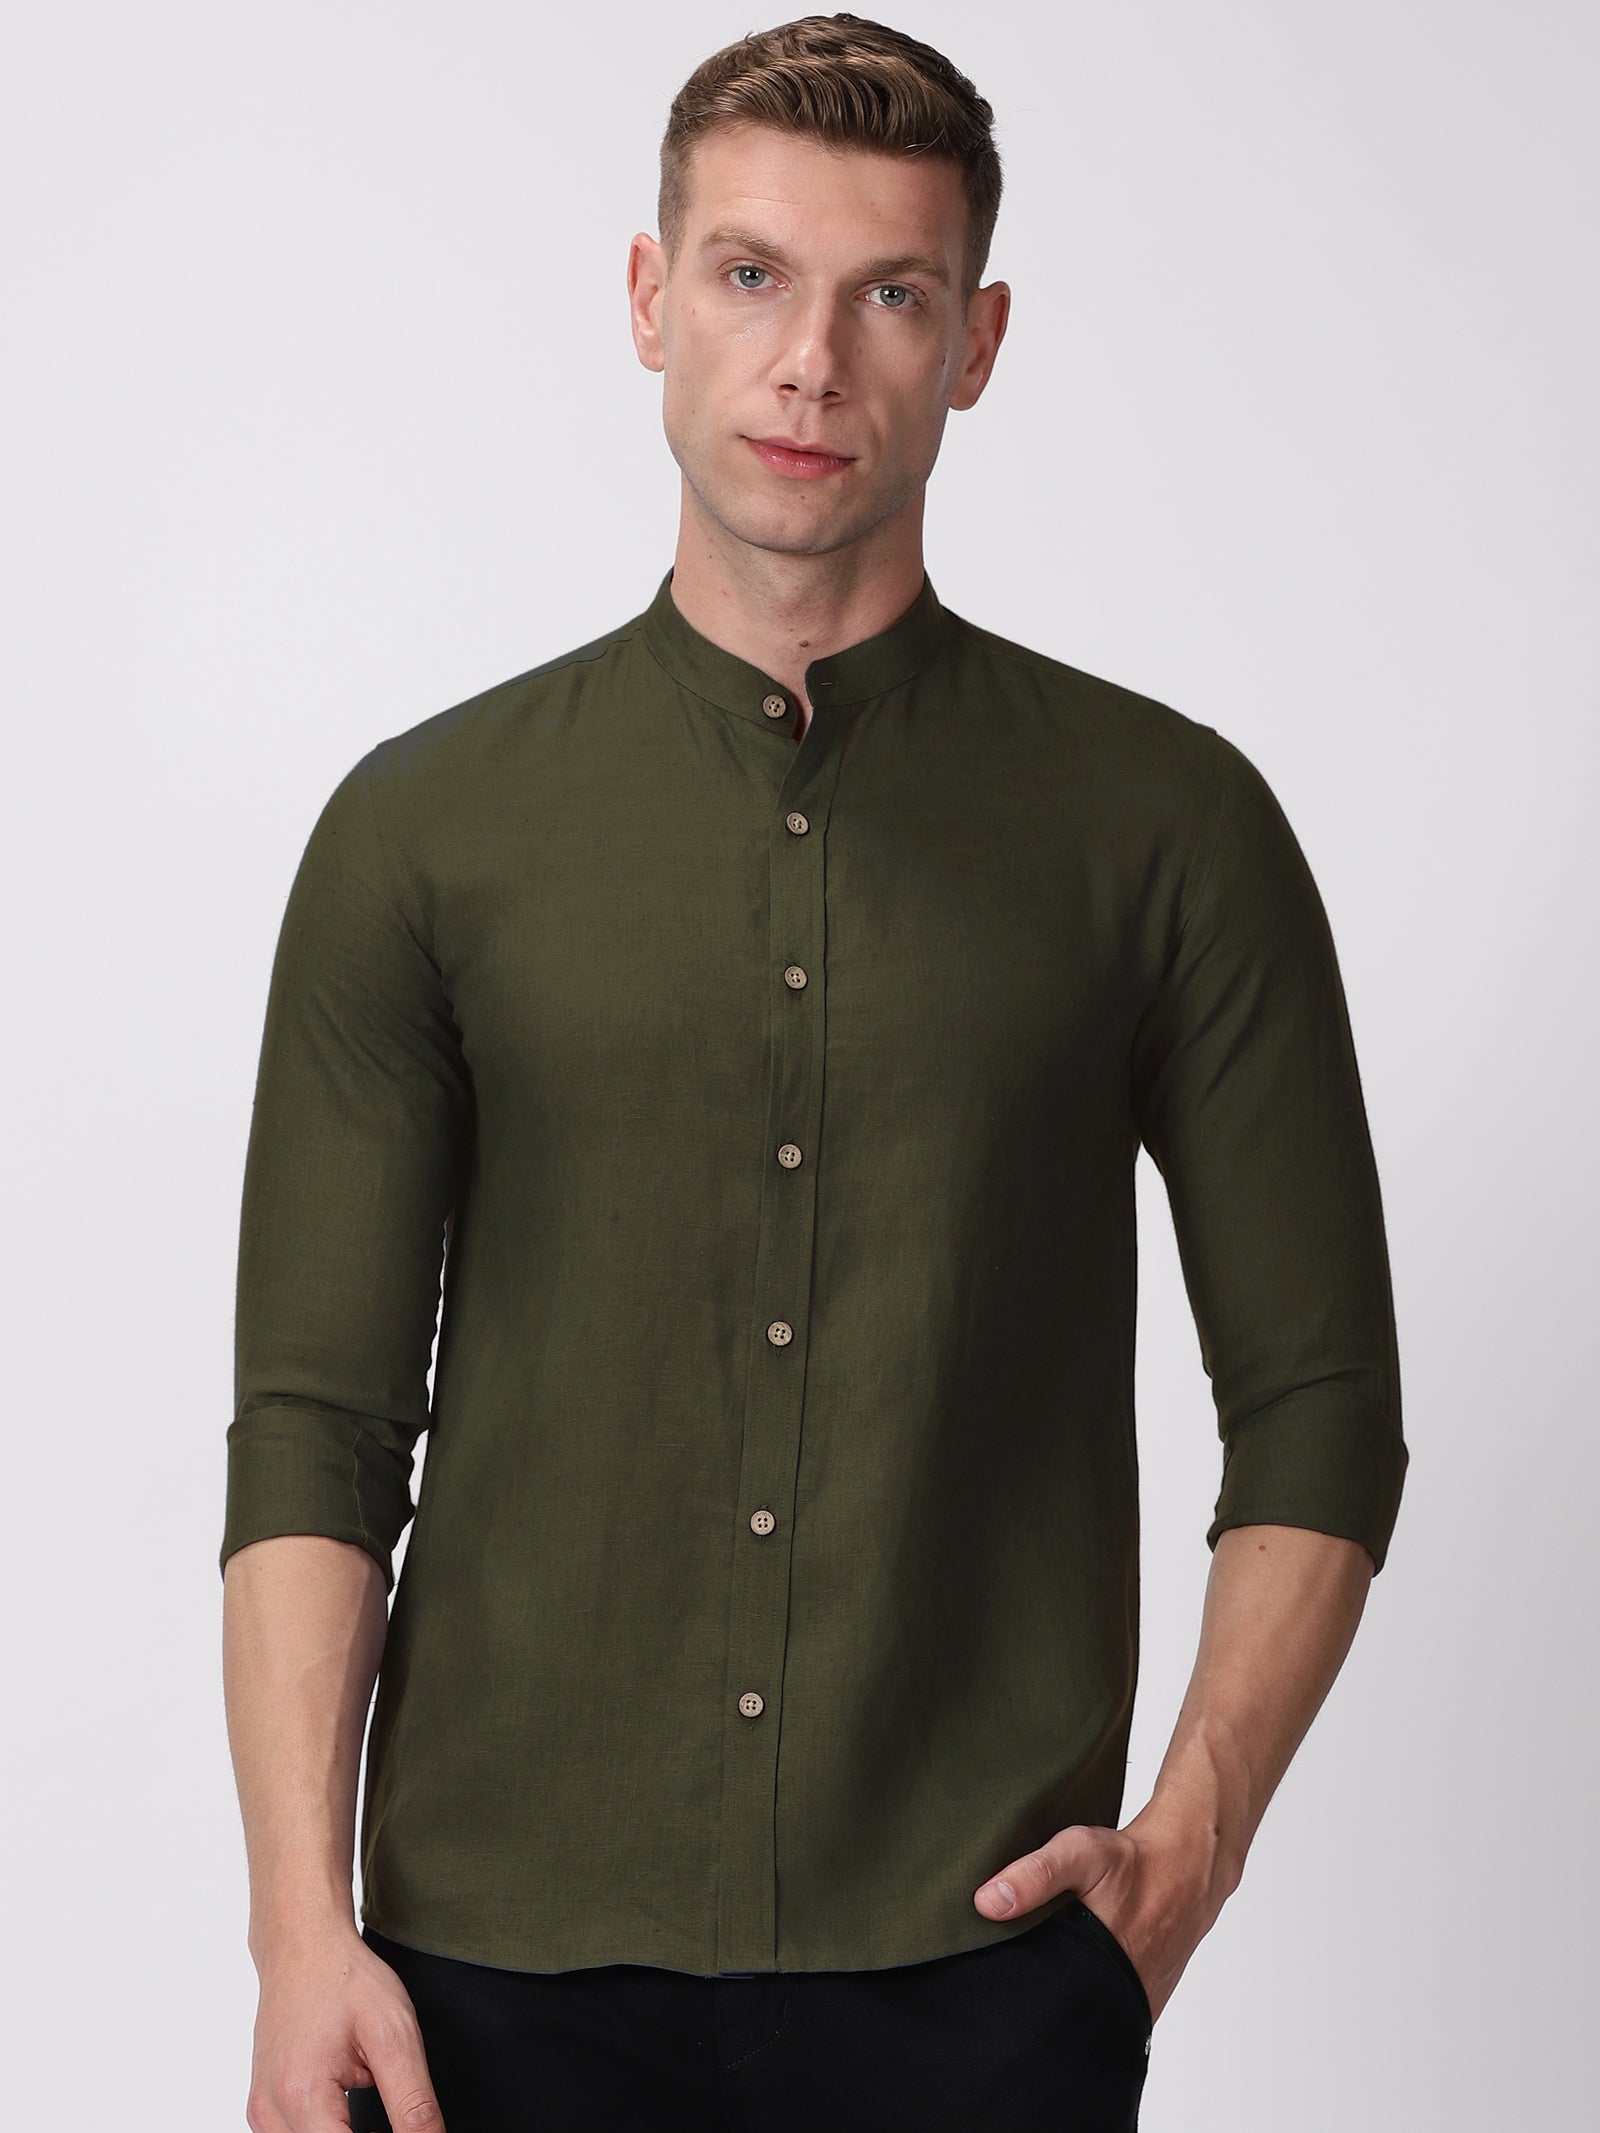 Solid Formal Satin Stretch Cotton Olive Green Shirt